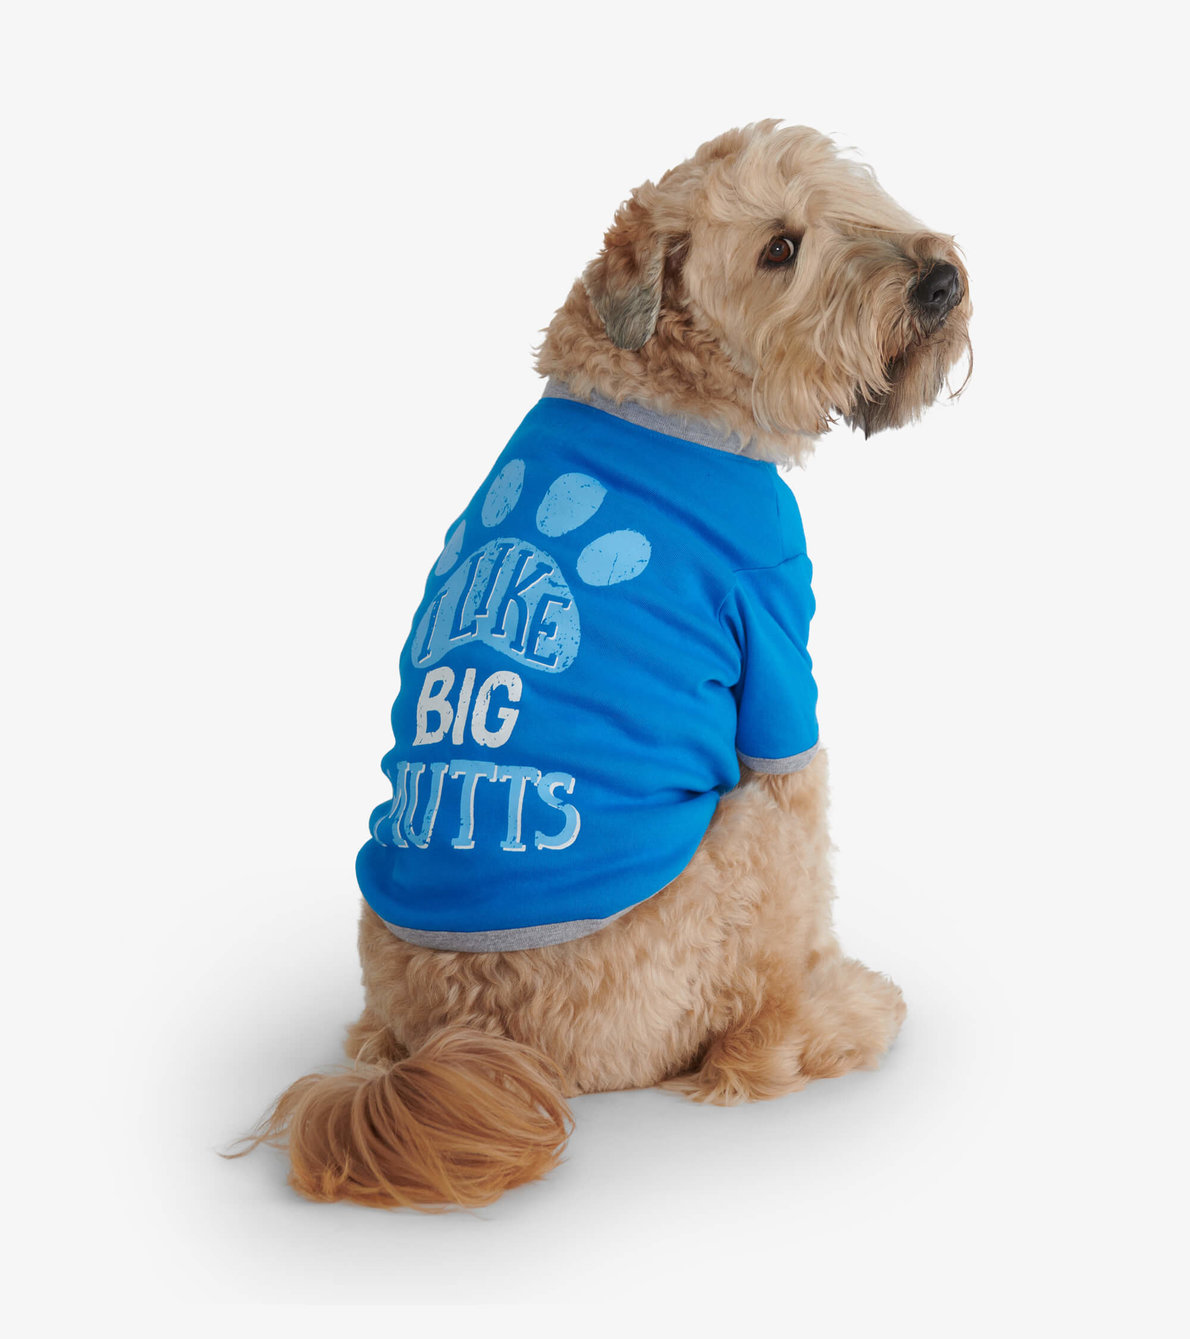 View larger image of Big Mutts Dog Tee